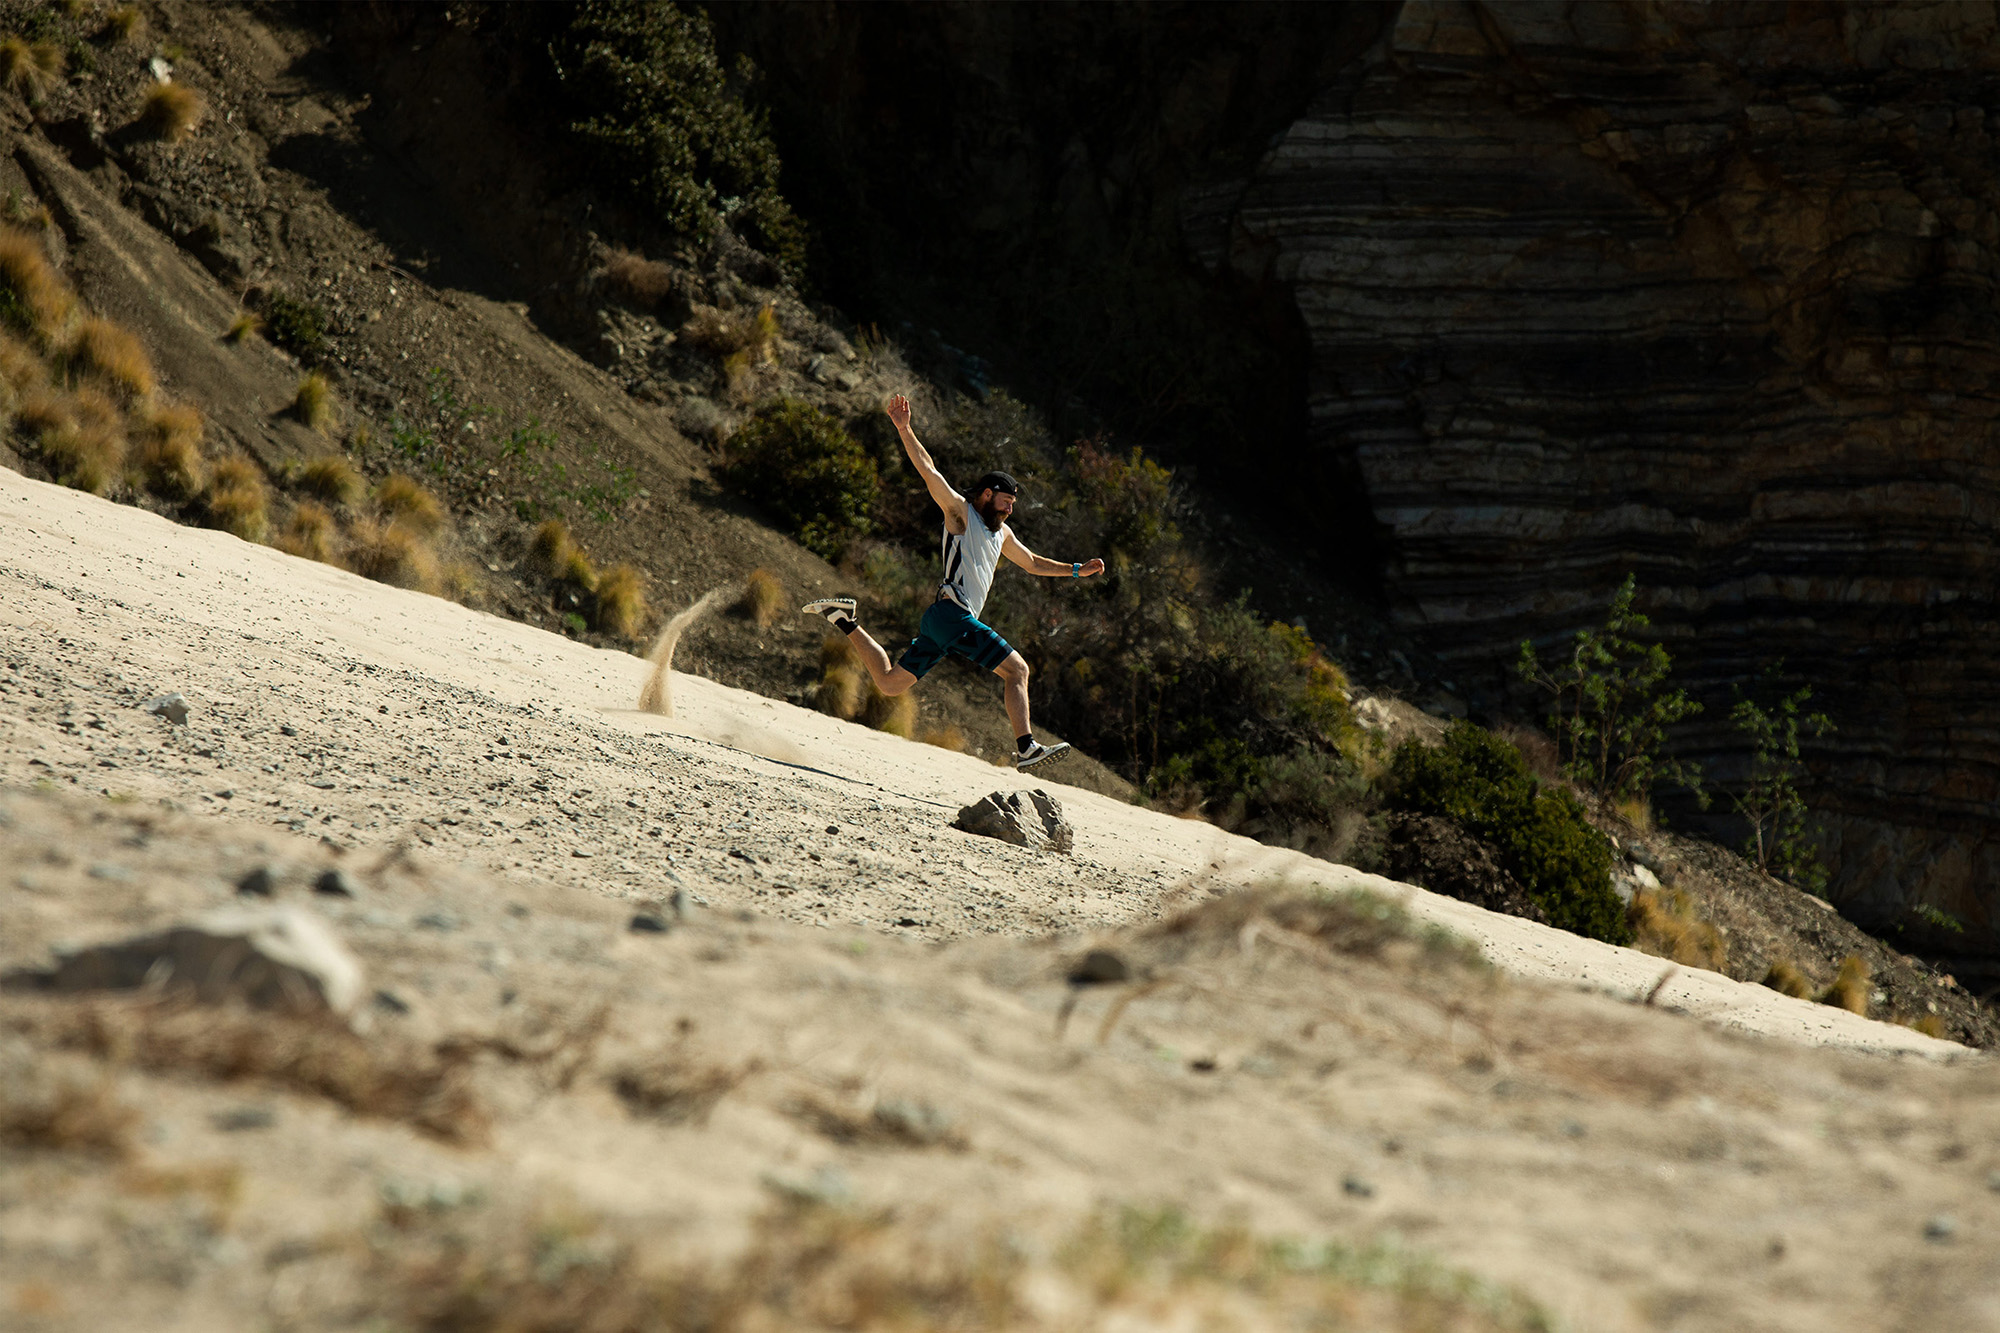 Campaigns and advertising photographed across the U.S. documenting real athletes outdoors as the hiked, climbed, and went trail running throughout every environment.